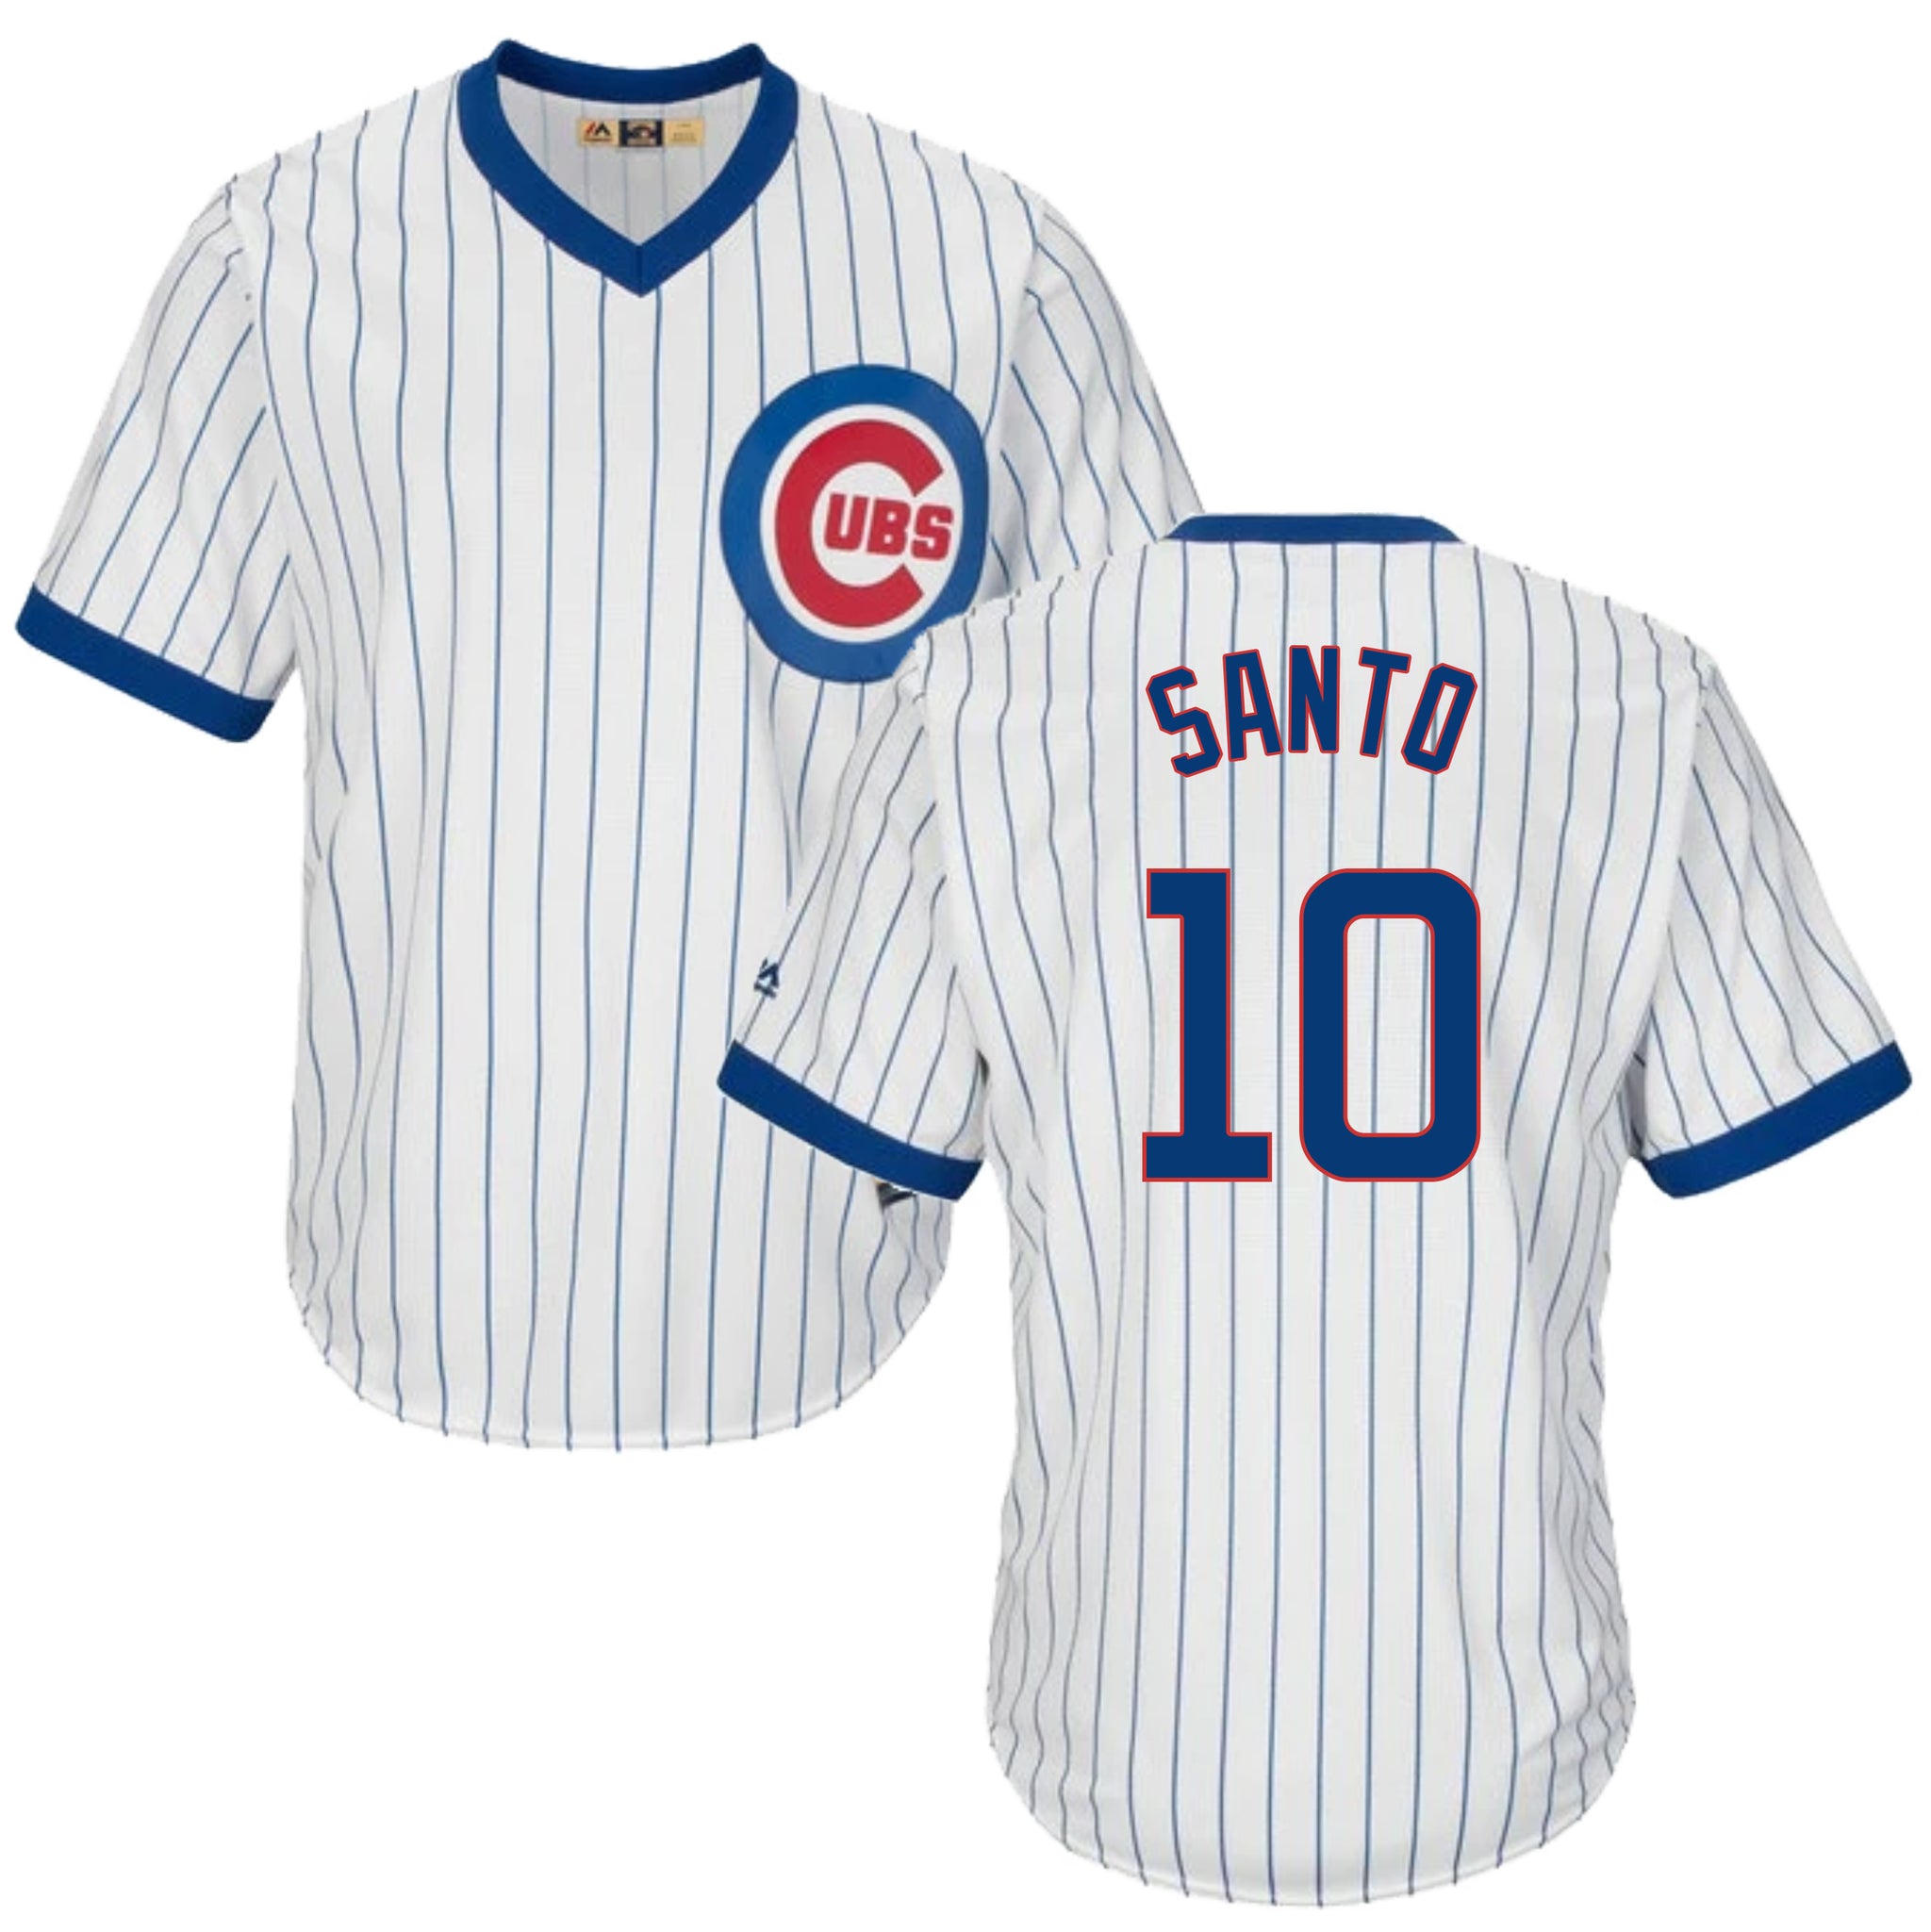 ron santo cooperstown jersey